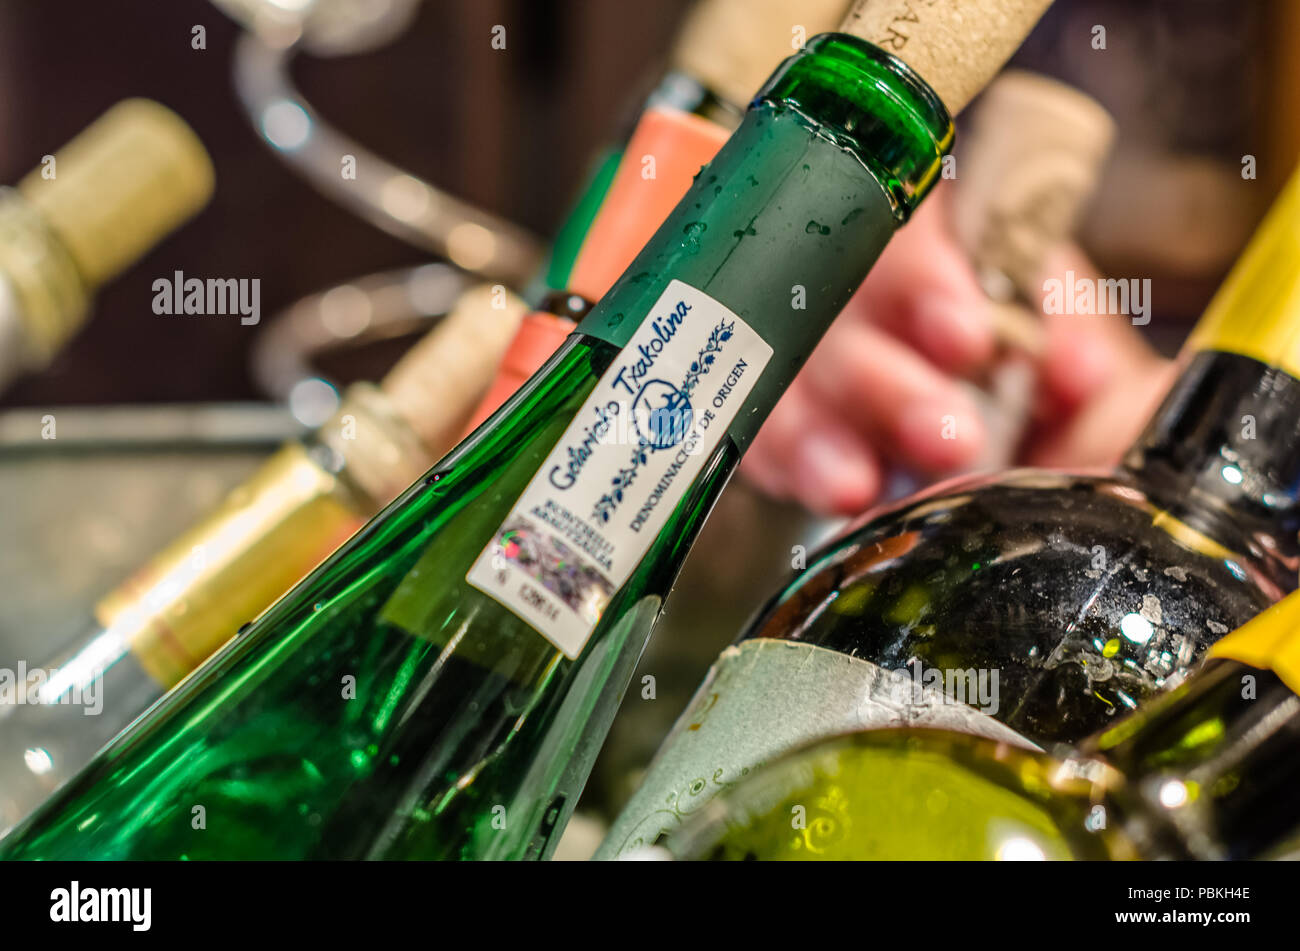 MADRID, SPAIN - AUGUST 27, 2017: Ice bucket with bottles of wine served in a bar in Madrid, highlighting a bottle of txakoli, a Spanish white wine Stock Photo